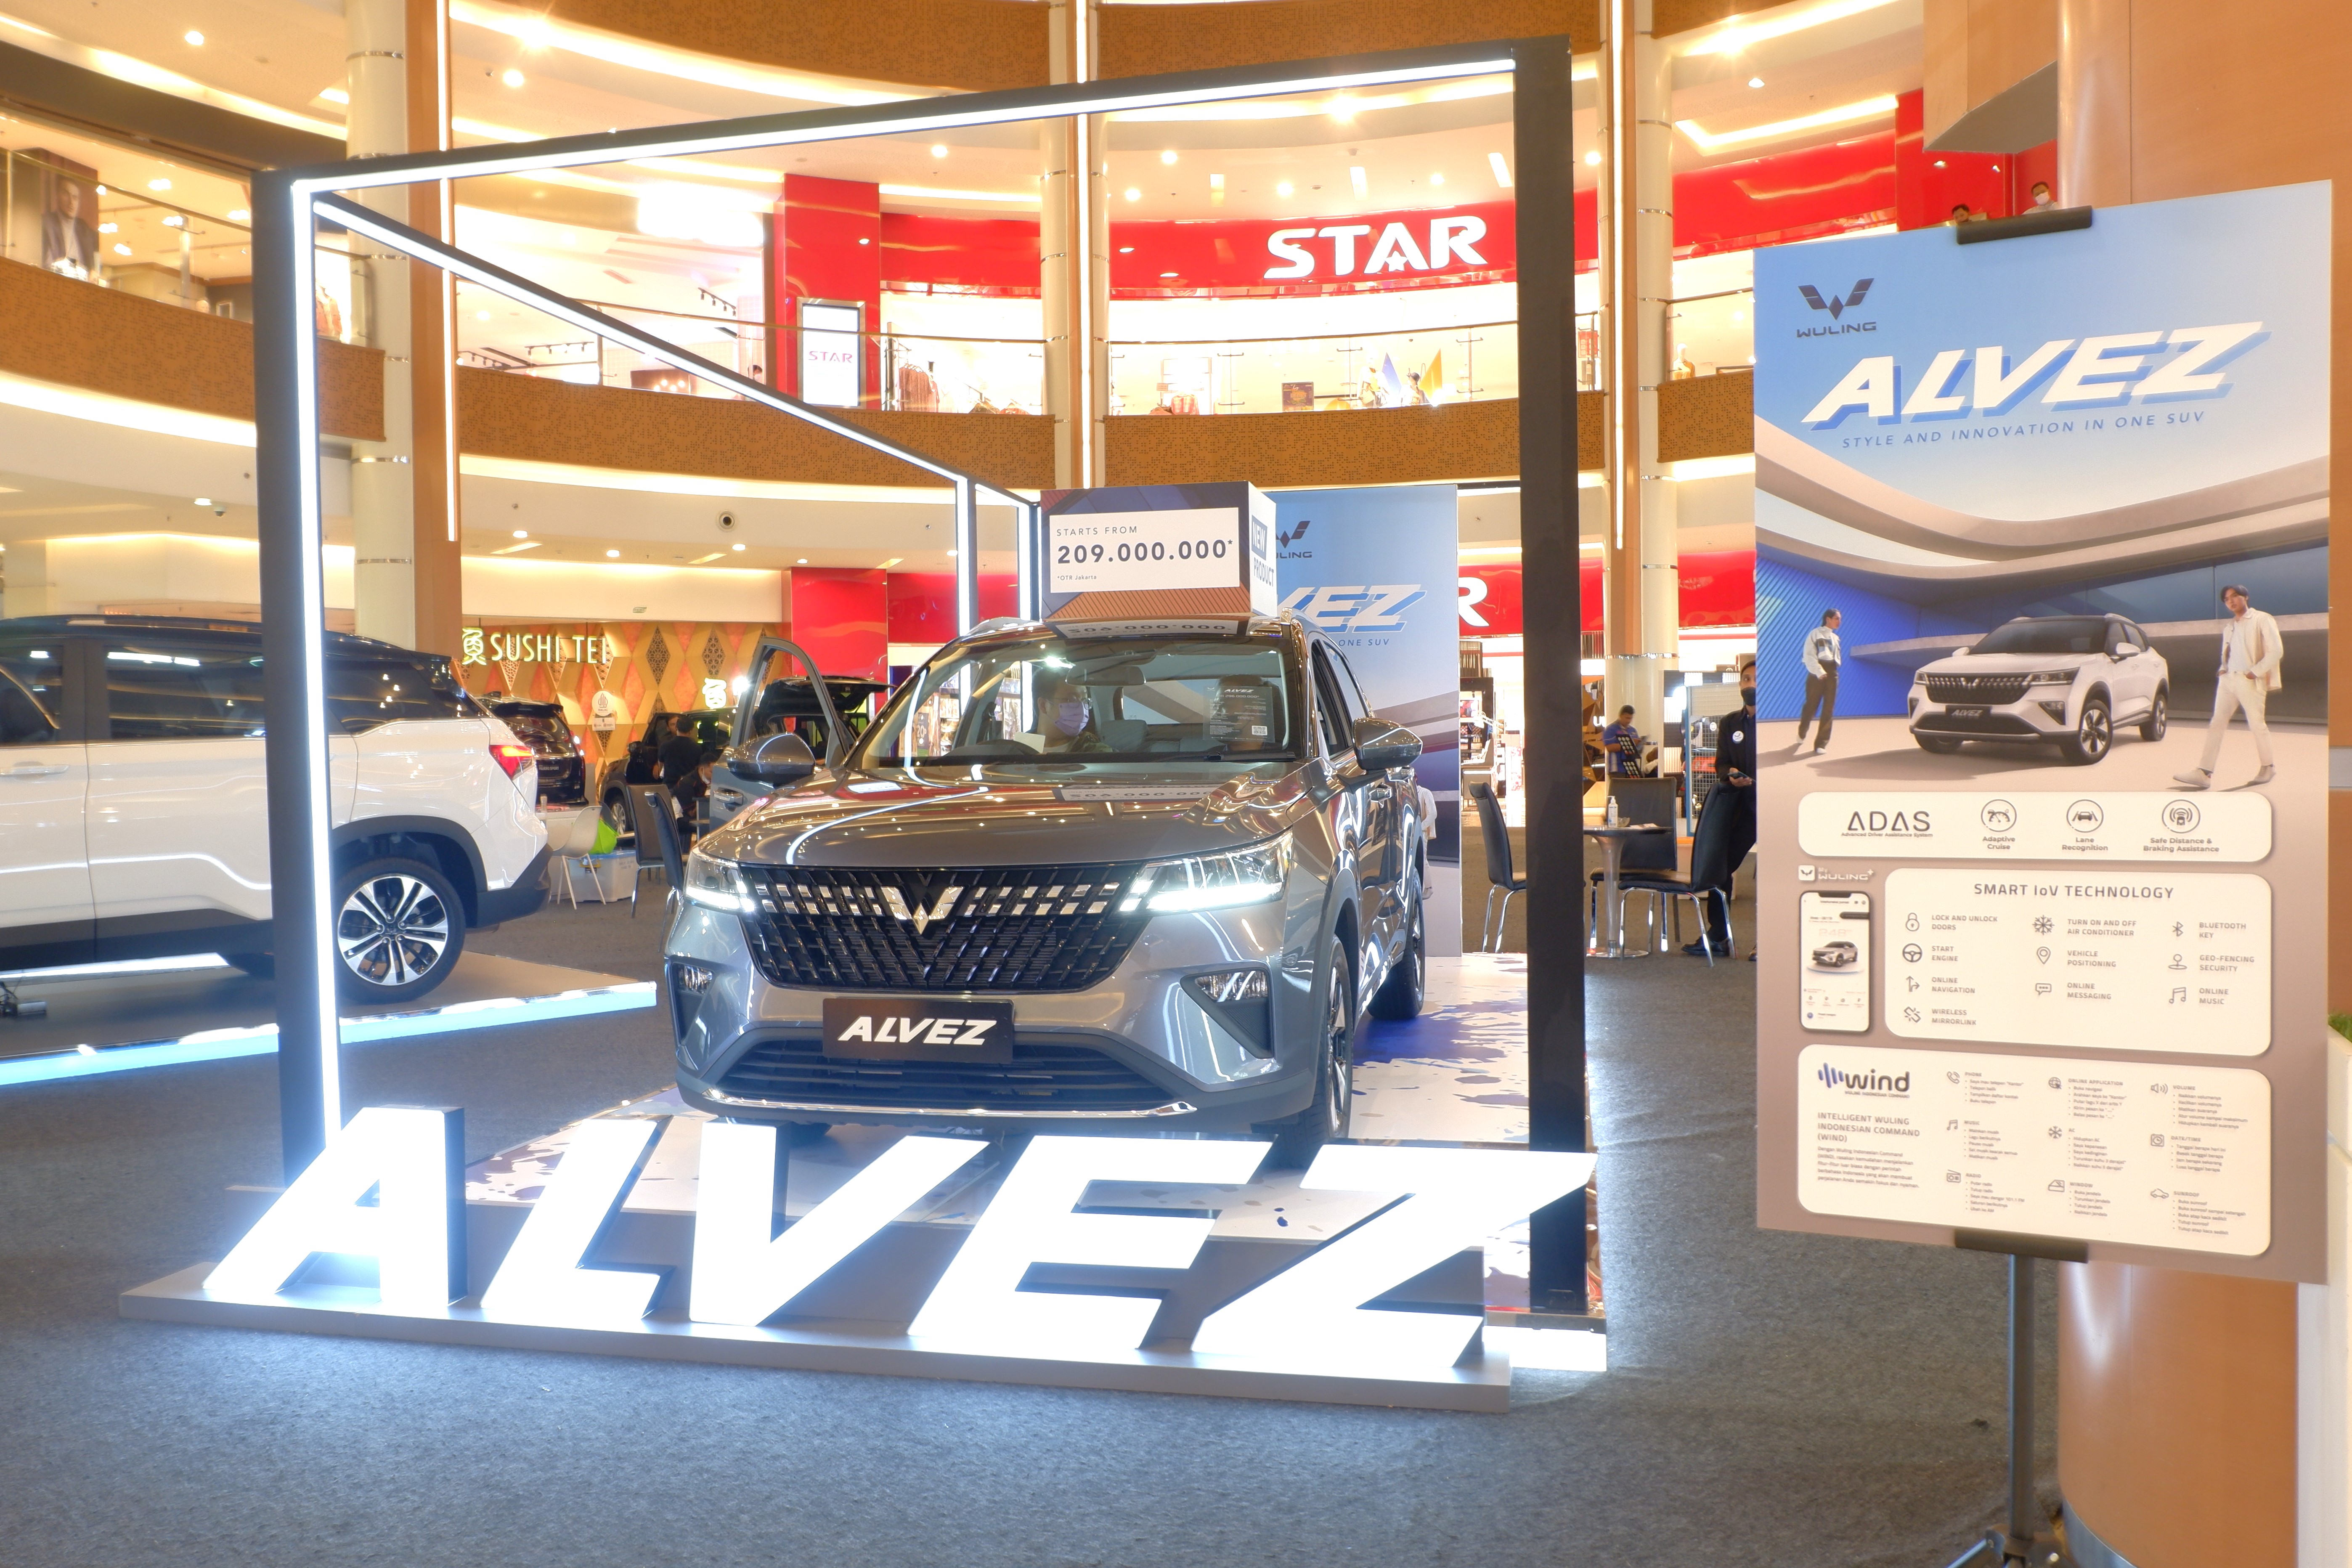 Image Alvez, Wuling’s Newest Compact SUV Greets The People of Bekasi